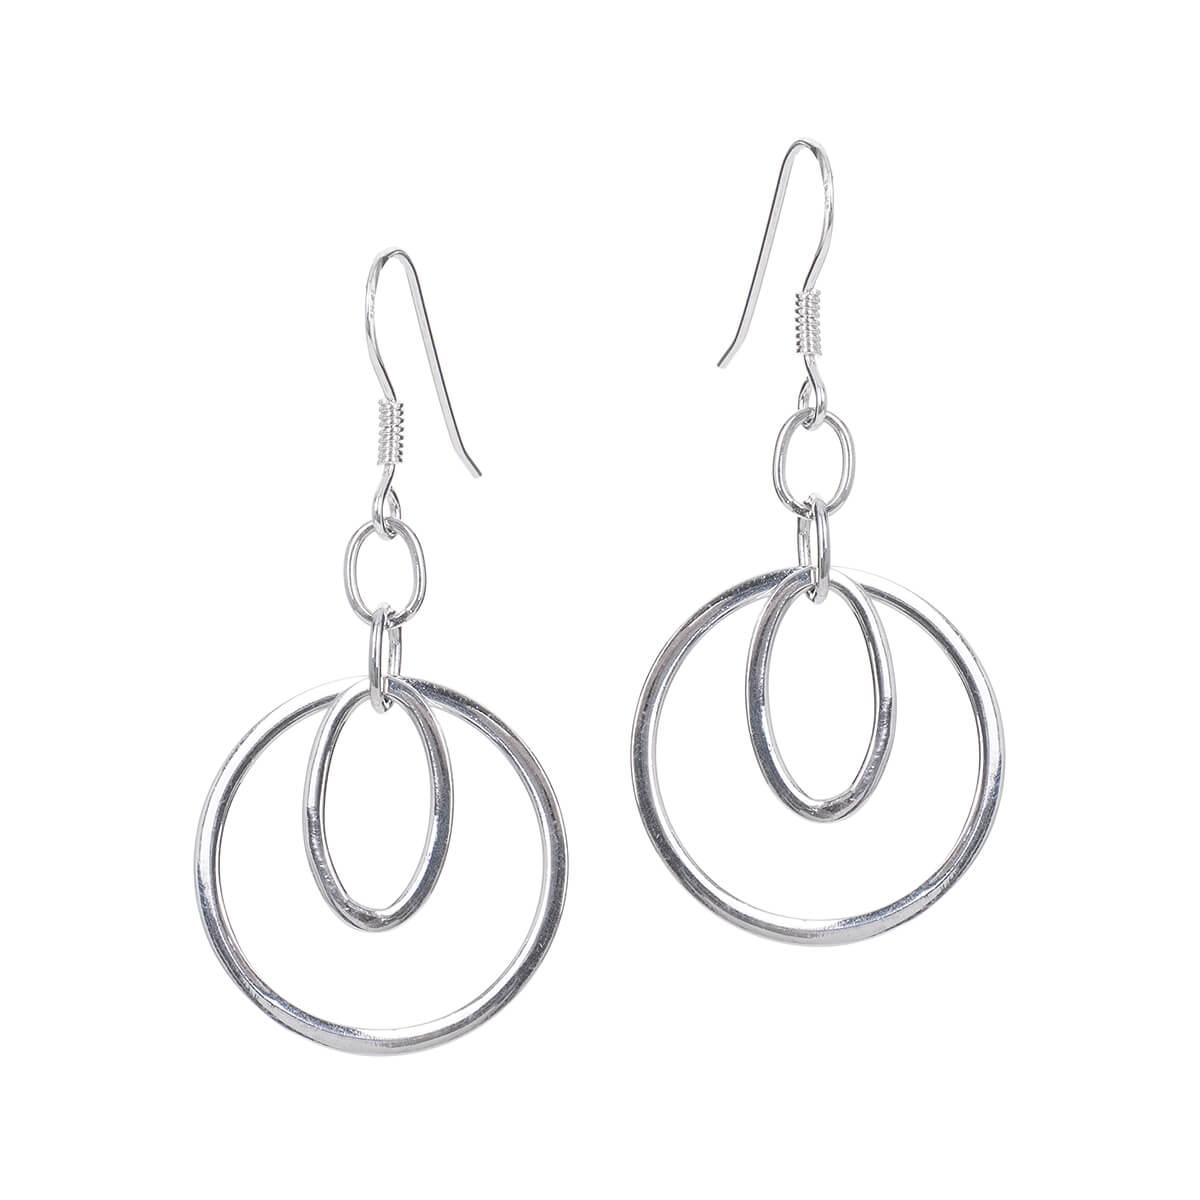 THE WELMAN GROUP | Sterling Silver Dangle Earring with Floating Ovals